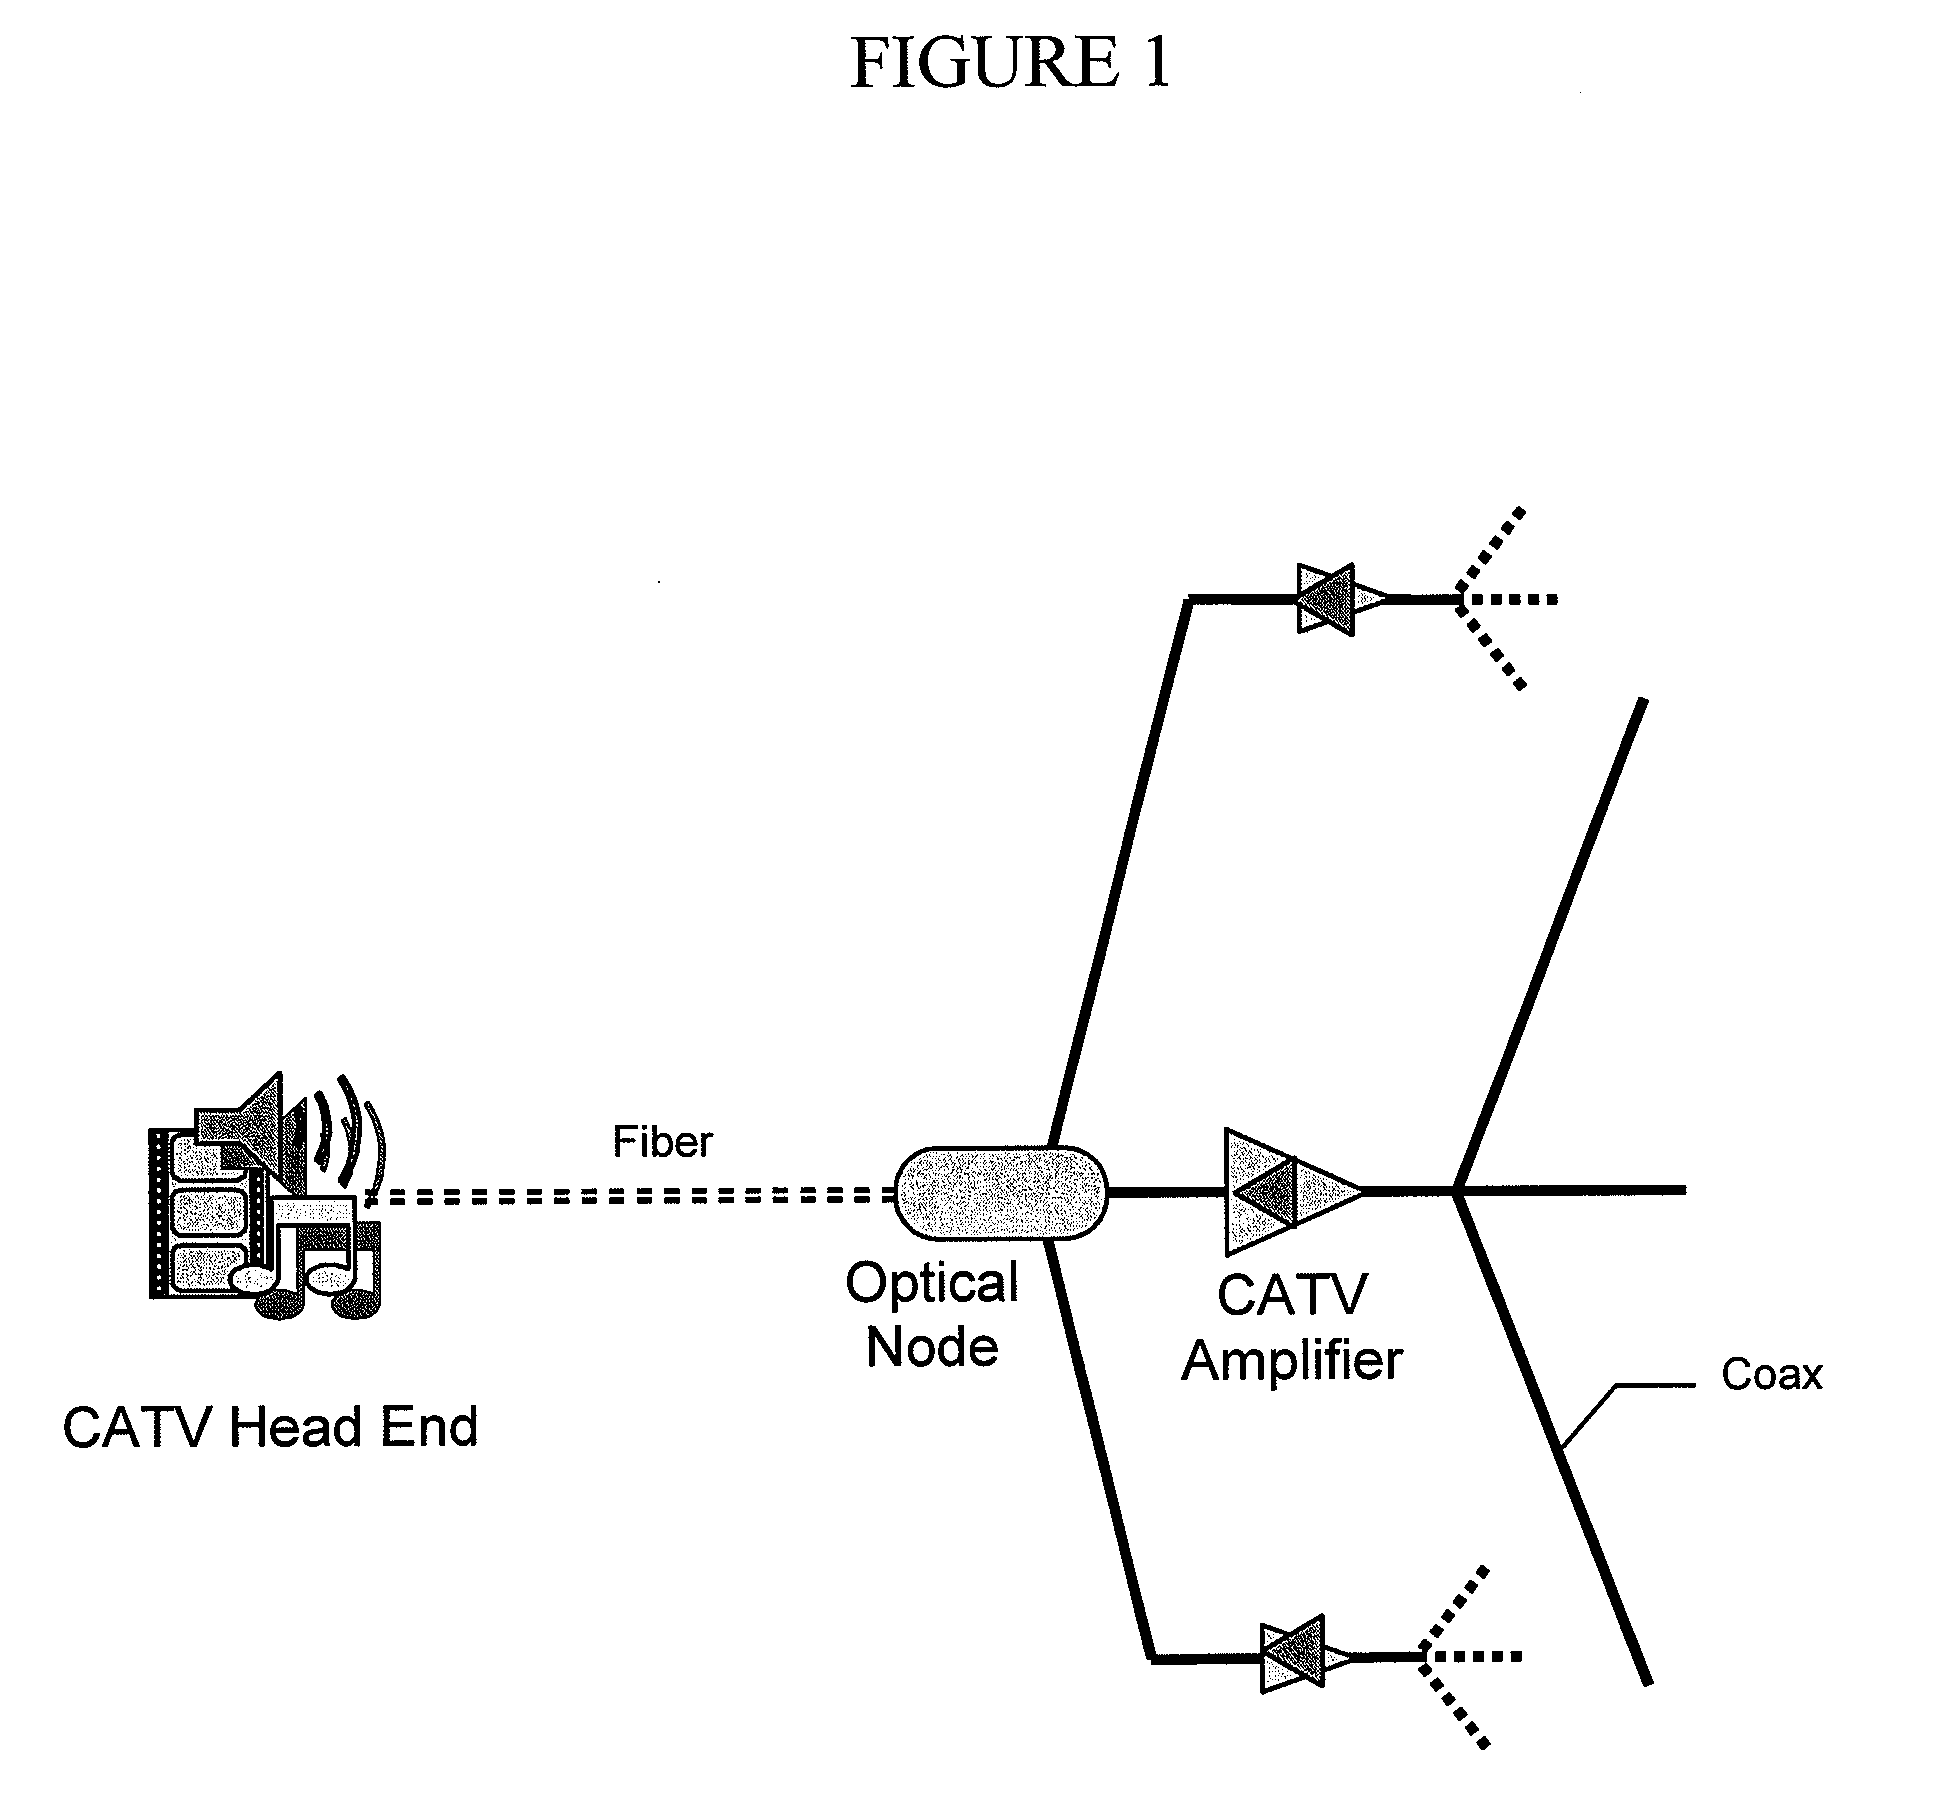 Method and apparatus for providing wimax over catv, dbs, PON infrastructure